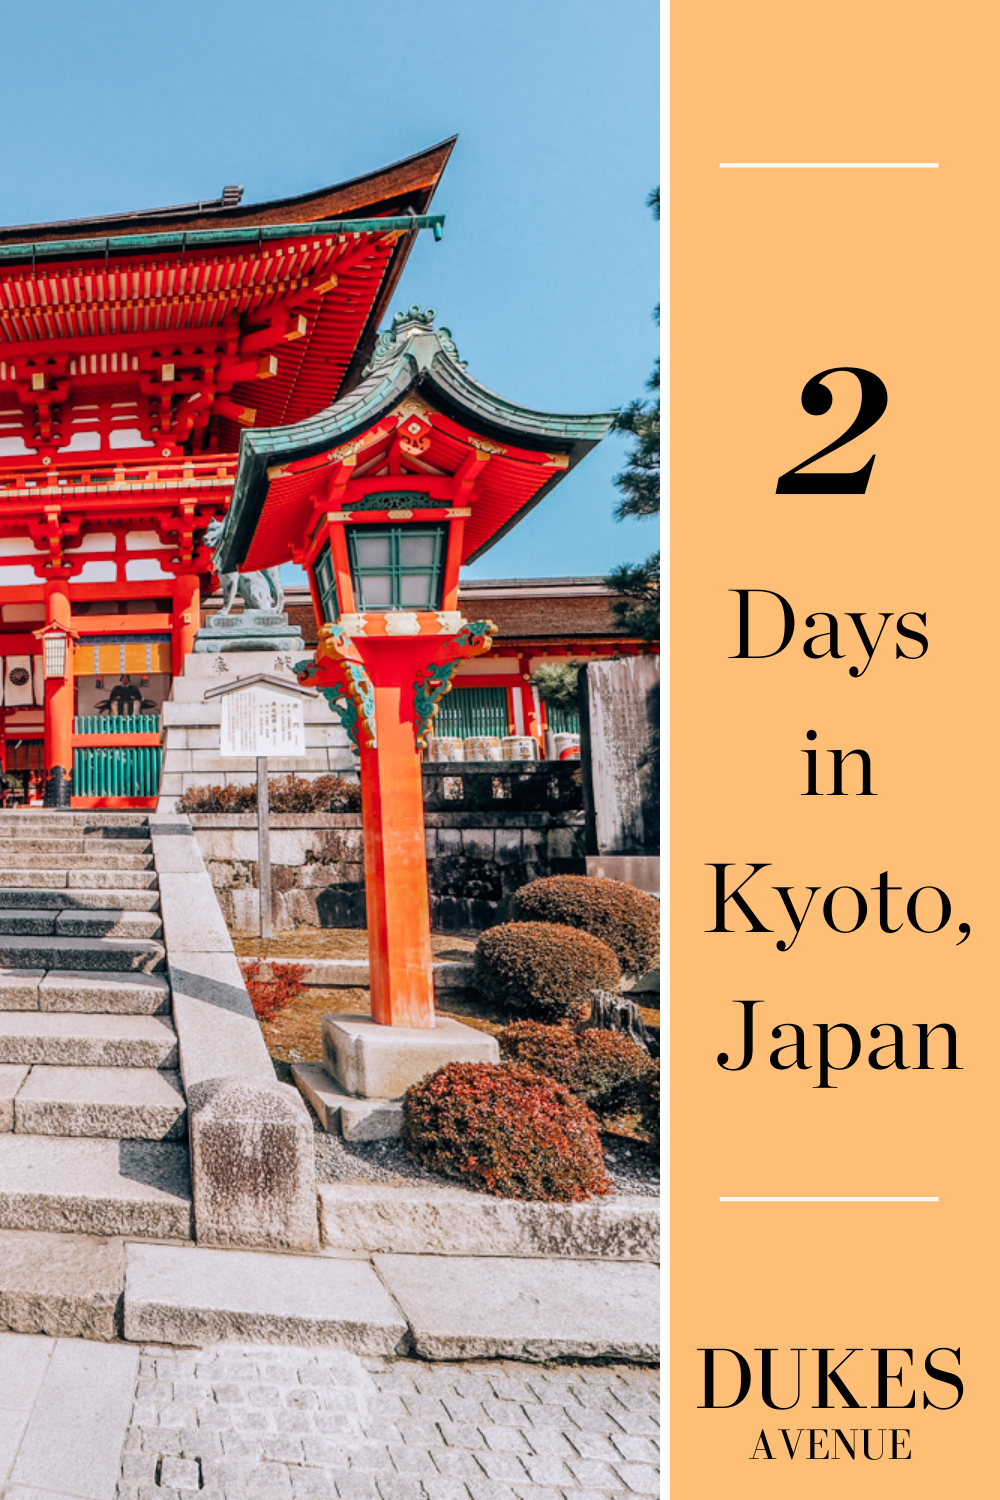 A famous spot in Kyoto with text overlay "2 Days in Kyoto, Japan"